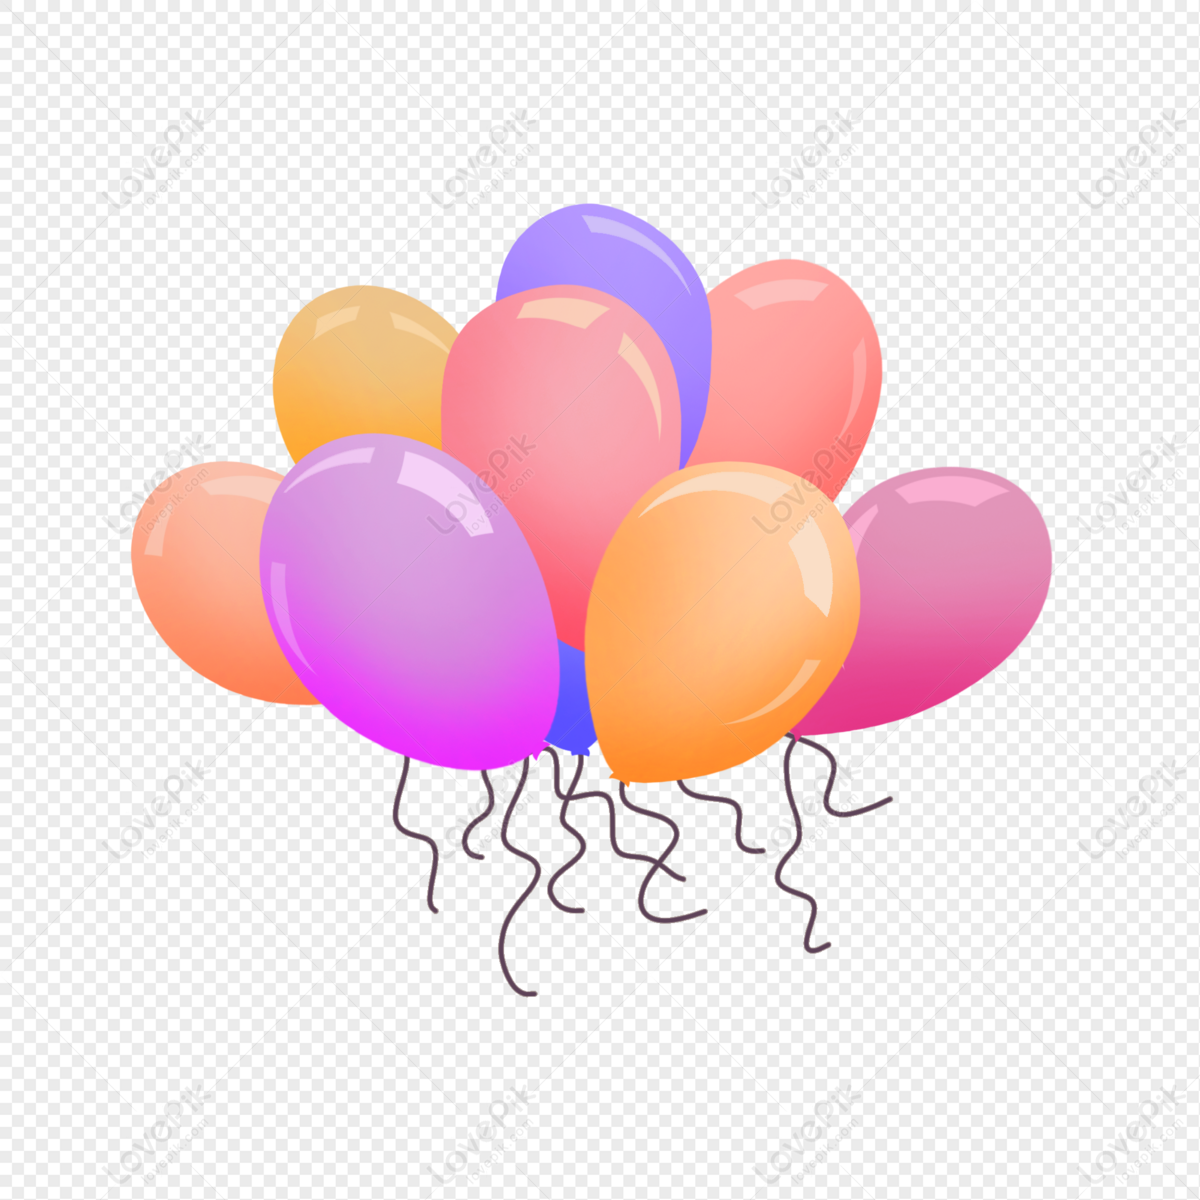 Colorful Balloons PNG Transparent Background And Clipart Image For Free  Download - Lovepik | 401496390